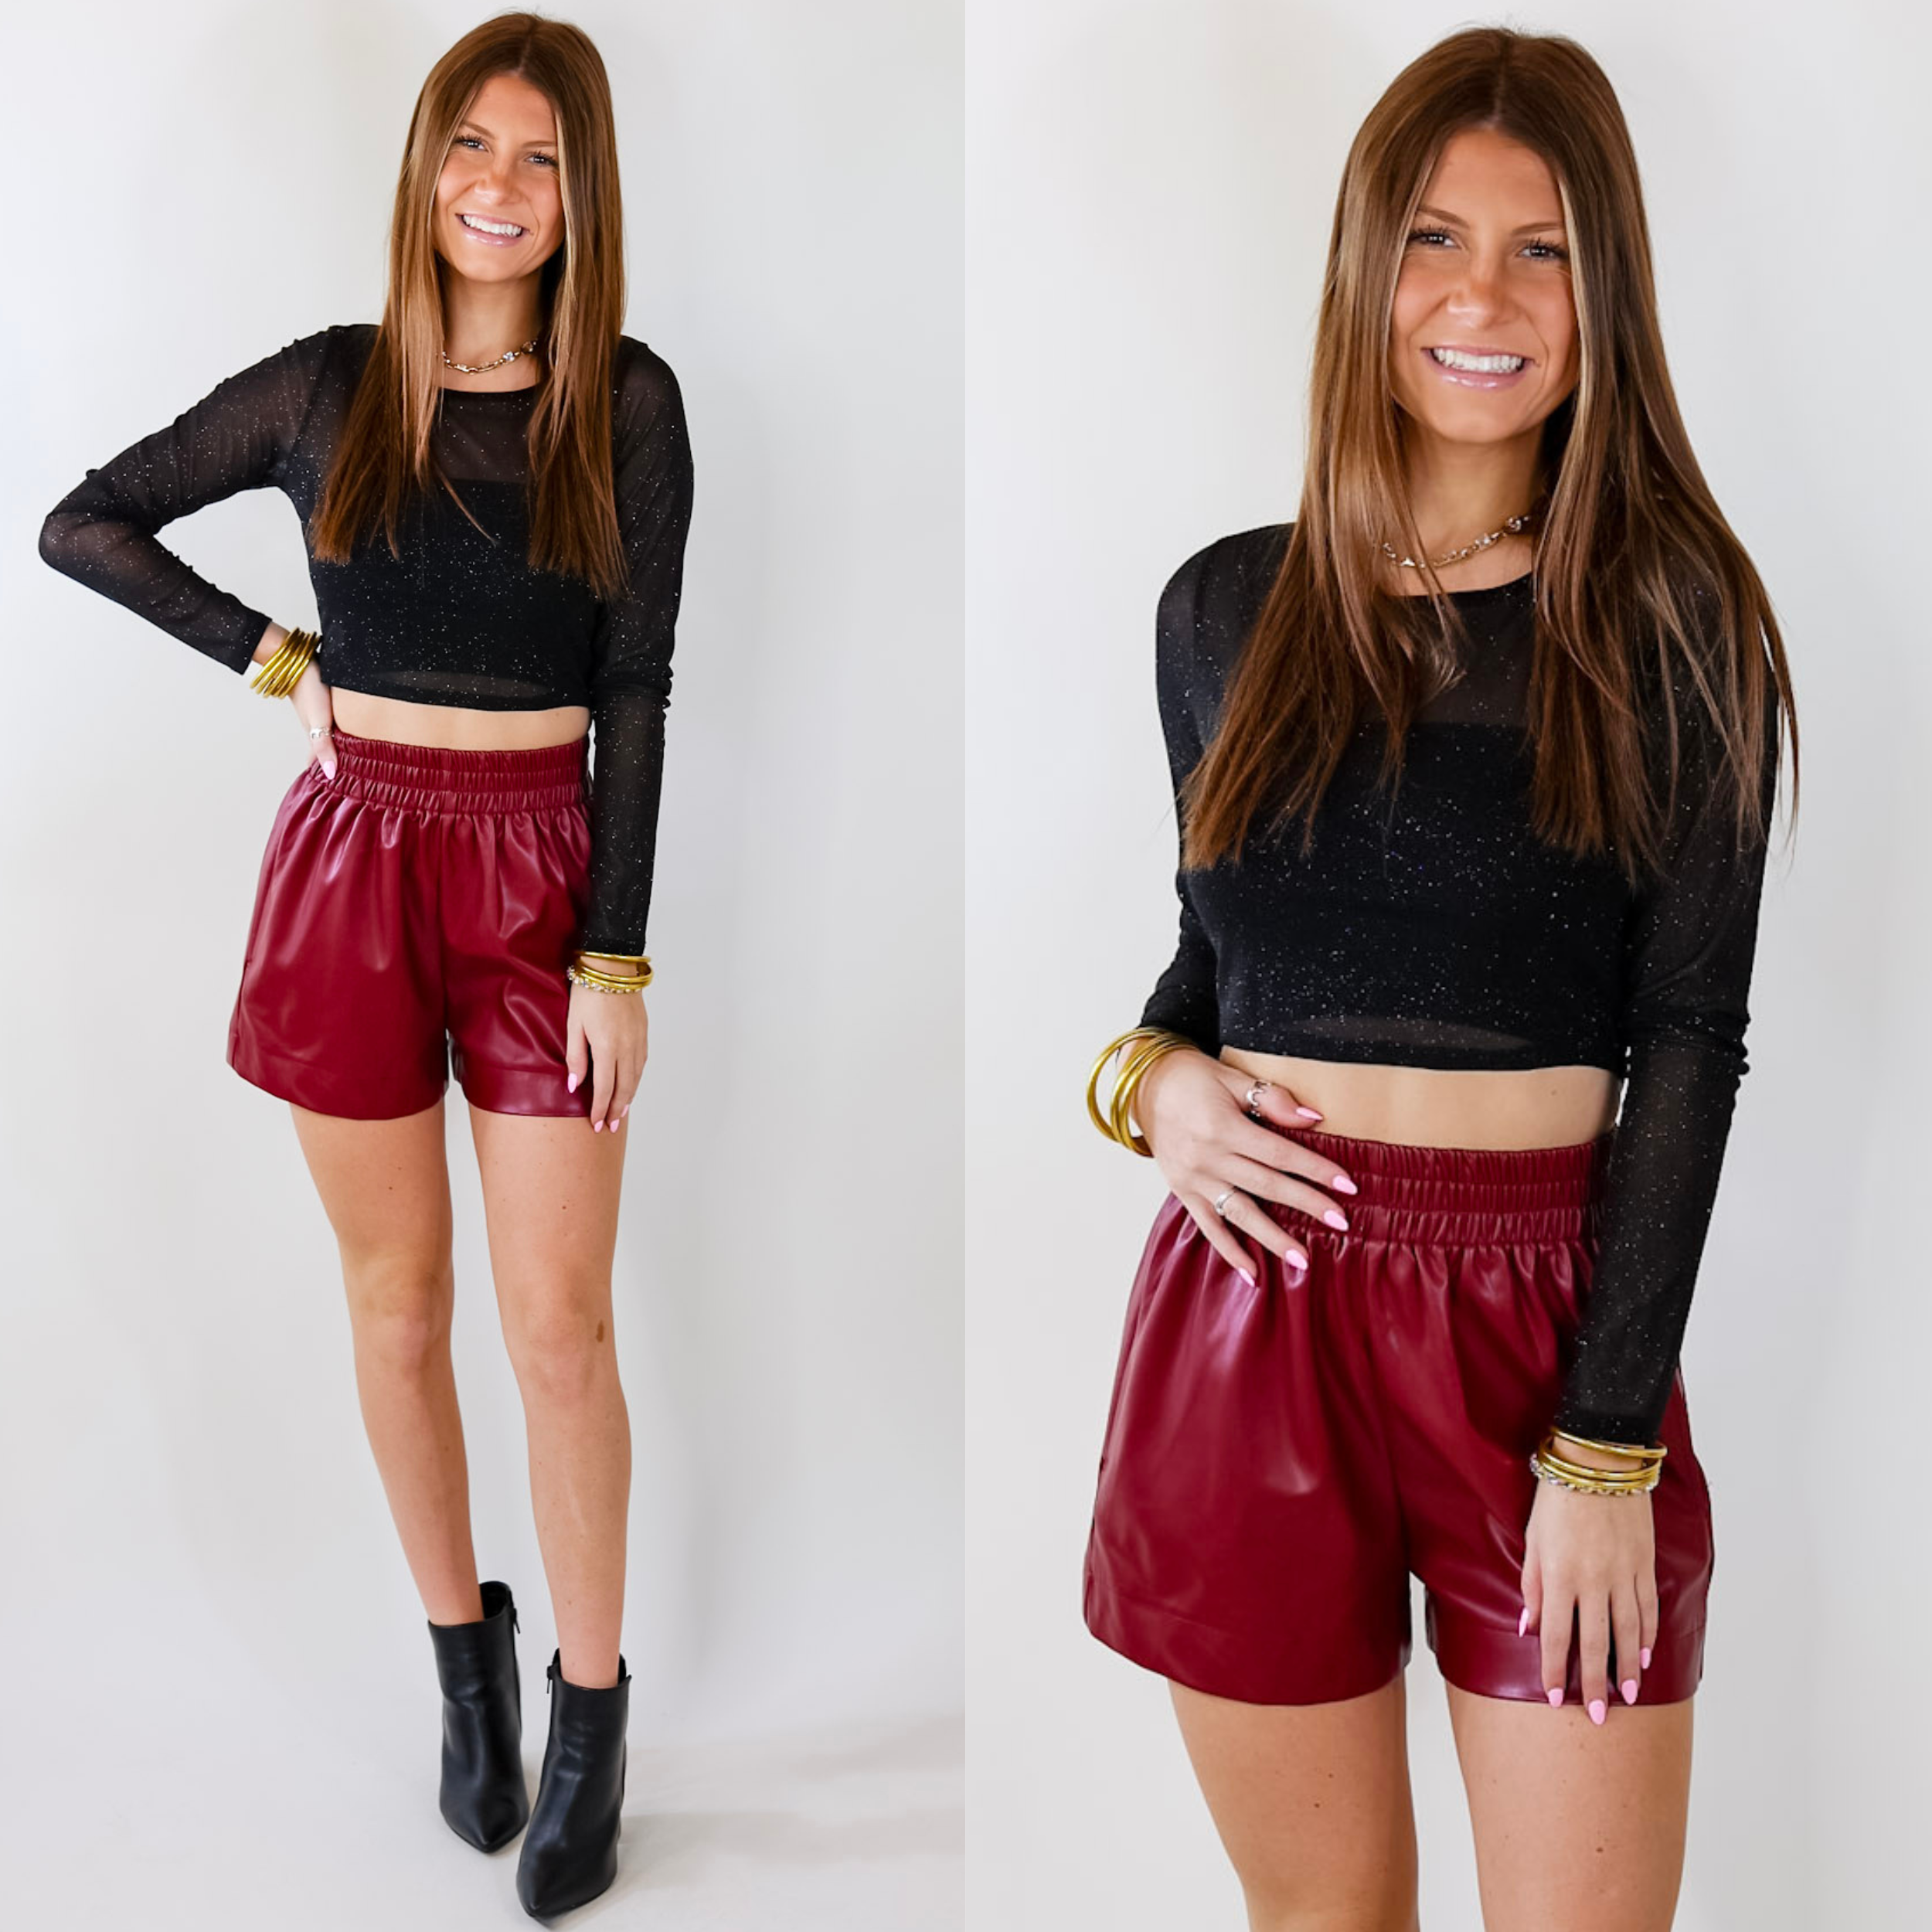 Model is wearing a black long sleeve crop top that is sparkly. Model has it paired with faux leather shorts, black booties, and gold jewelry.